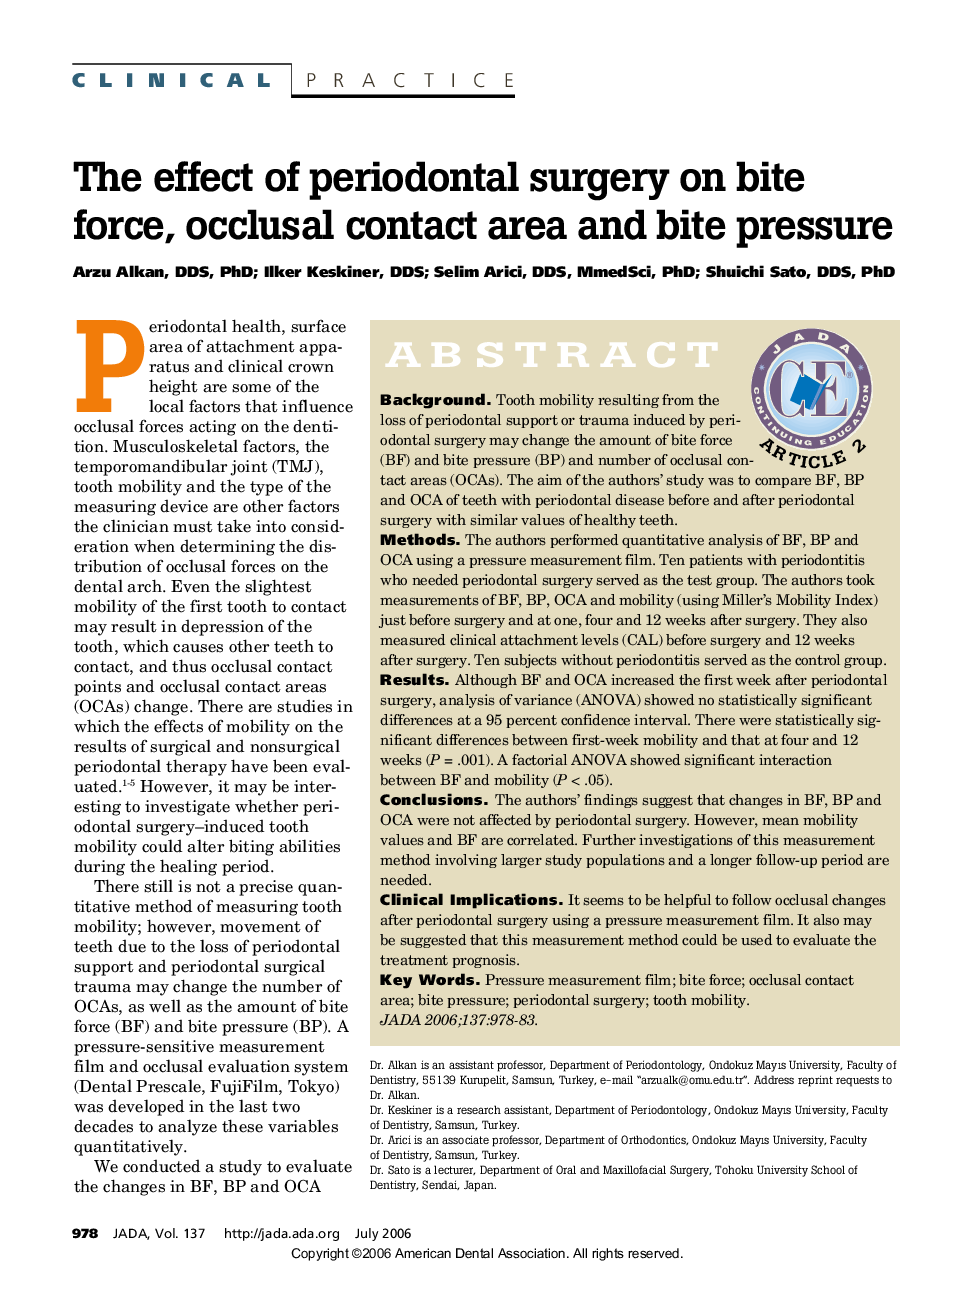 The effect of periodontal surgery on bite force, occlusal contact area and bite pressure